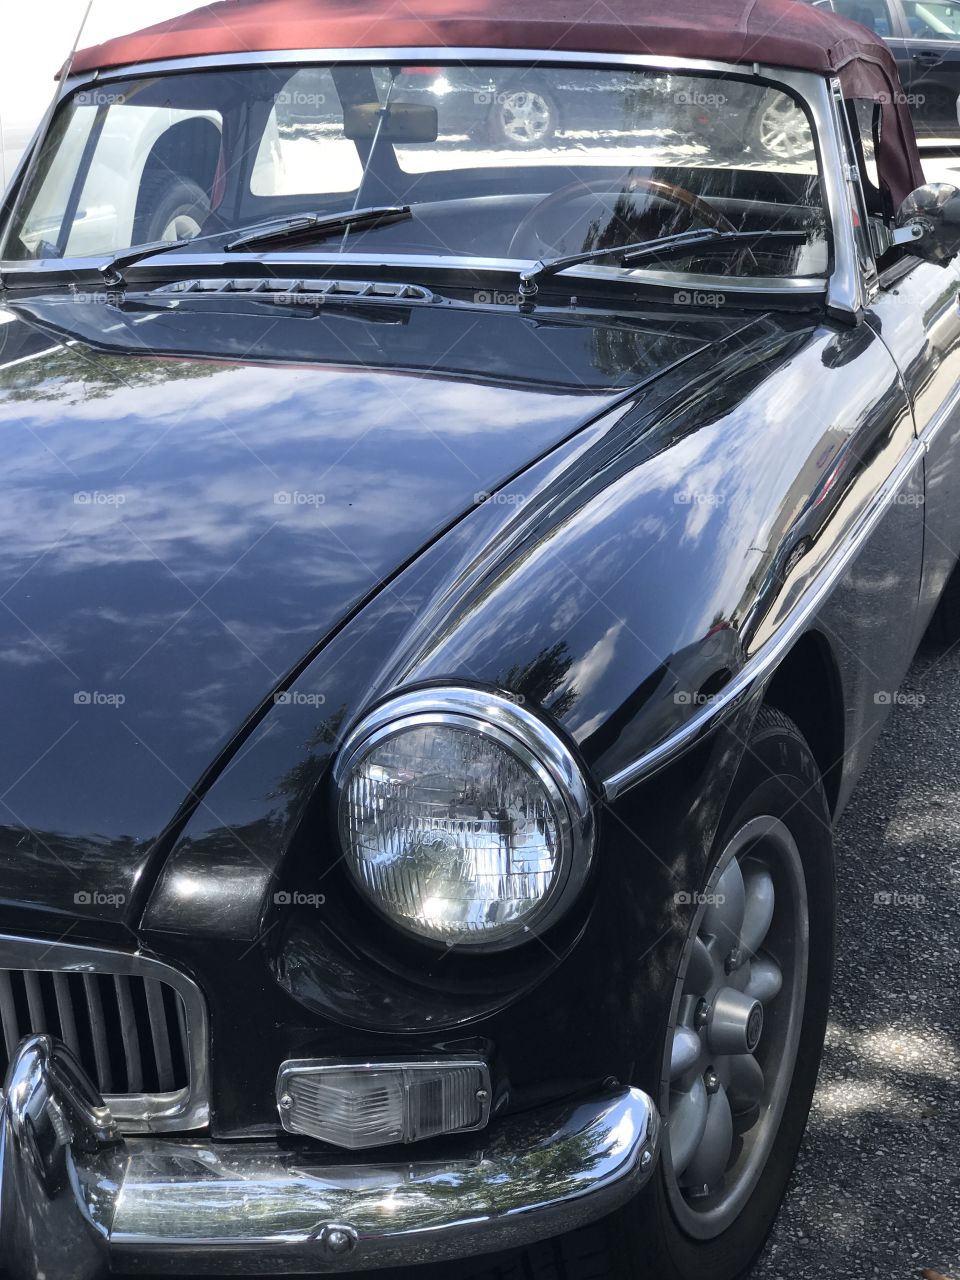 .odnalrO ni detacol tneduts FCU nA  .asleS yb kcilC Follow me @Selsa.Notes, Selsa.Clicks, or Selsa.   This an antique which was manufactured between 1955 - 1962.  This is a black convertible MG with red leather interior.   